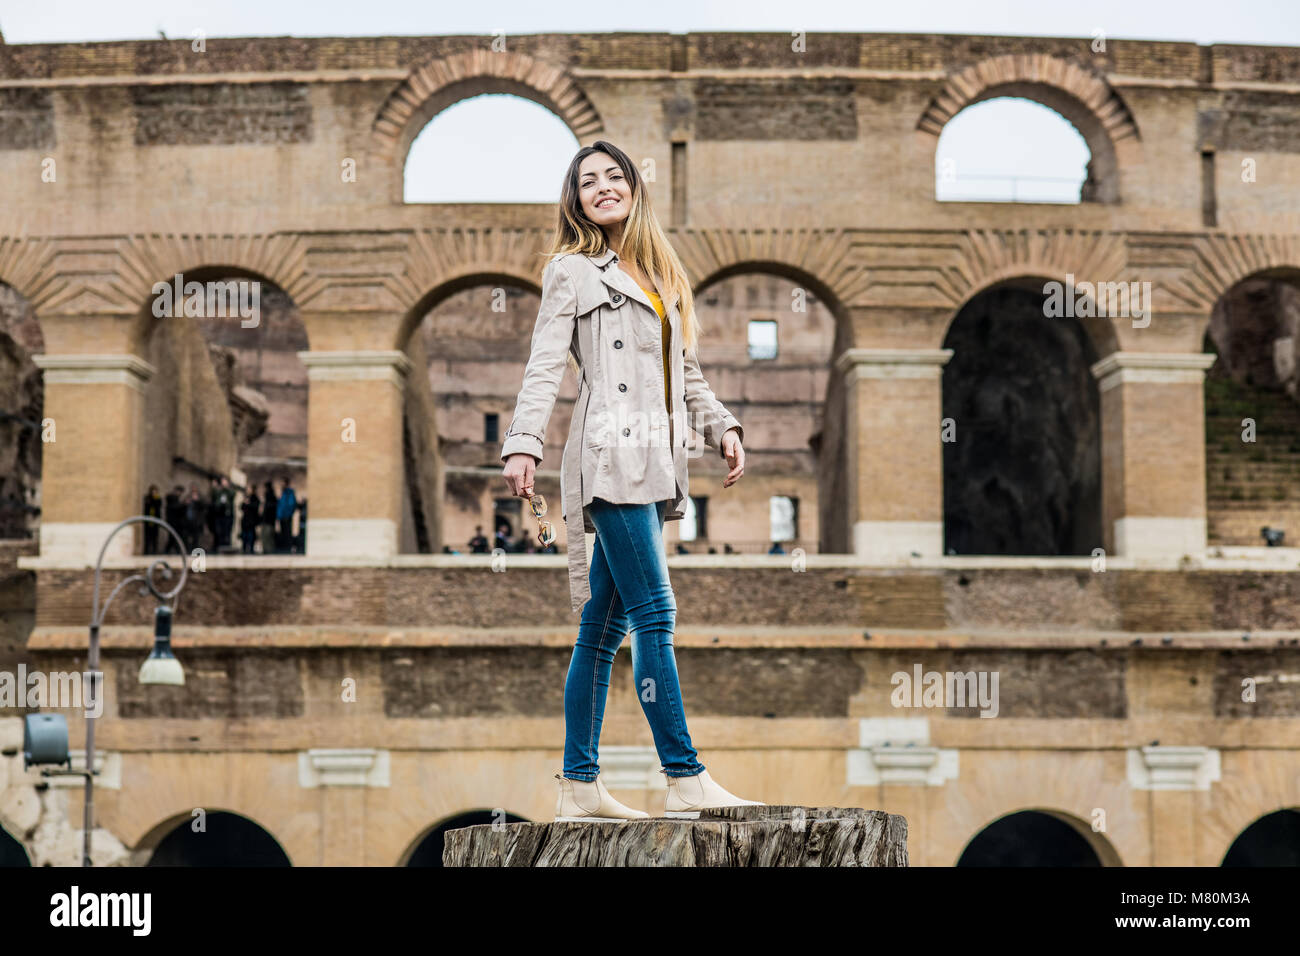 Young pretty tourist woman smiling and posing at colosseum monument in Rome Italy Stock Photo